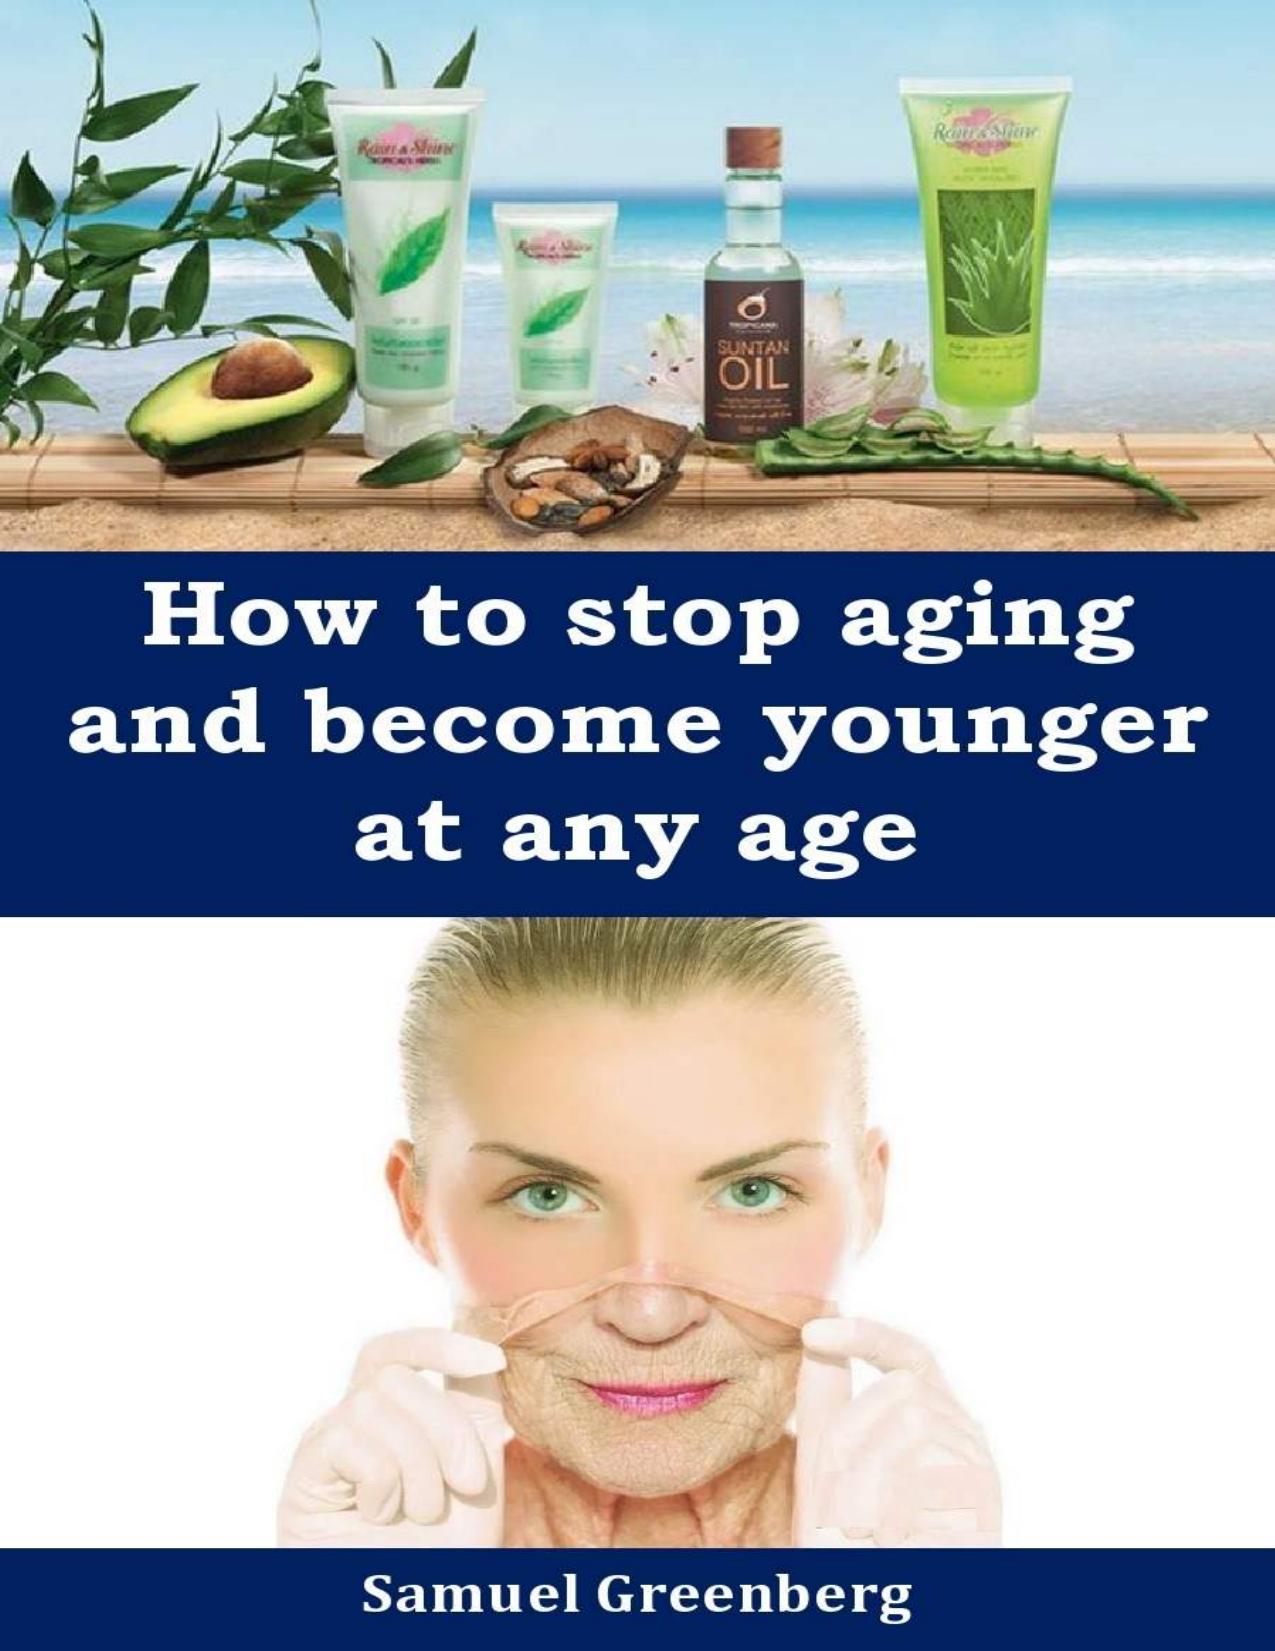 How to stop aging and become younger at any age by Samuel Greenberg